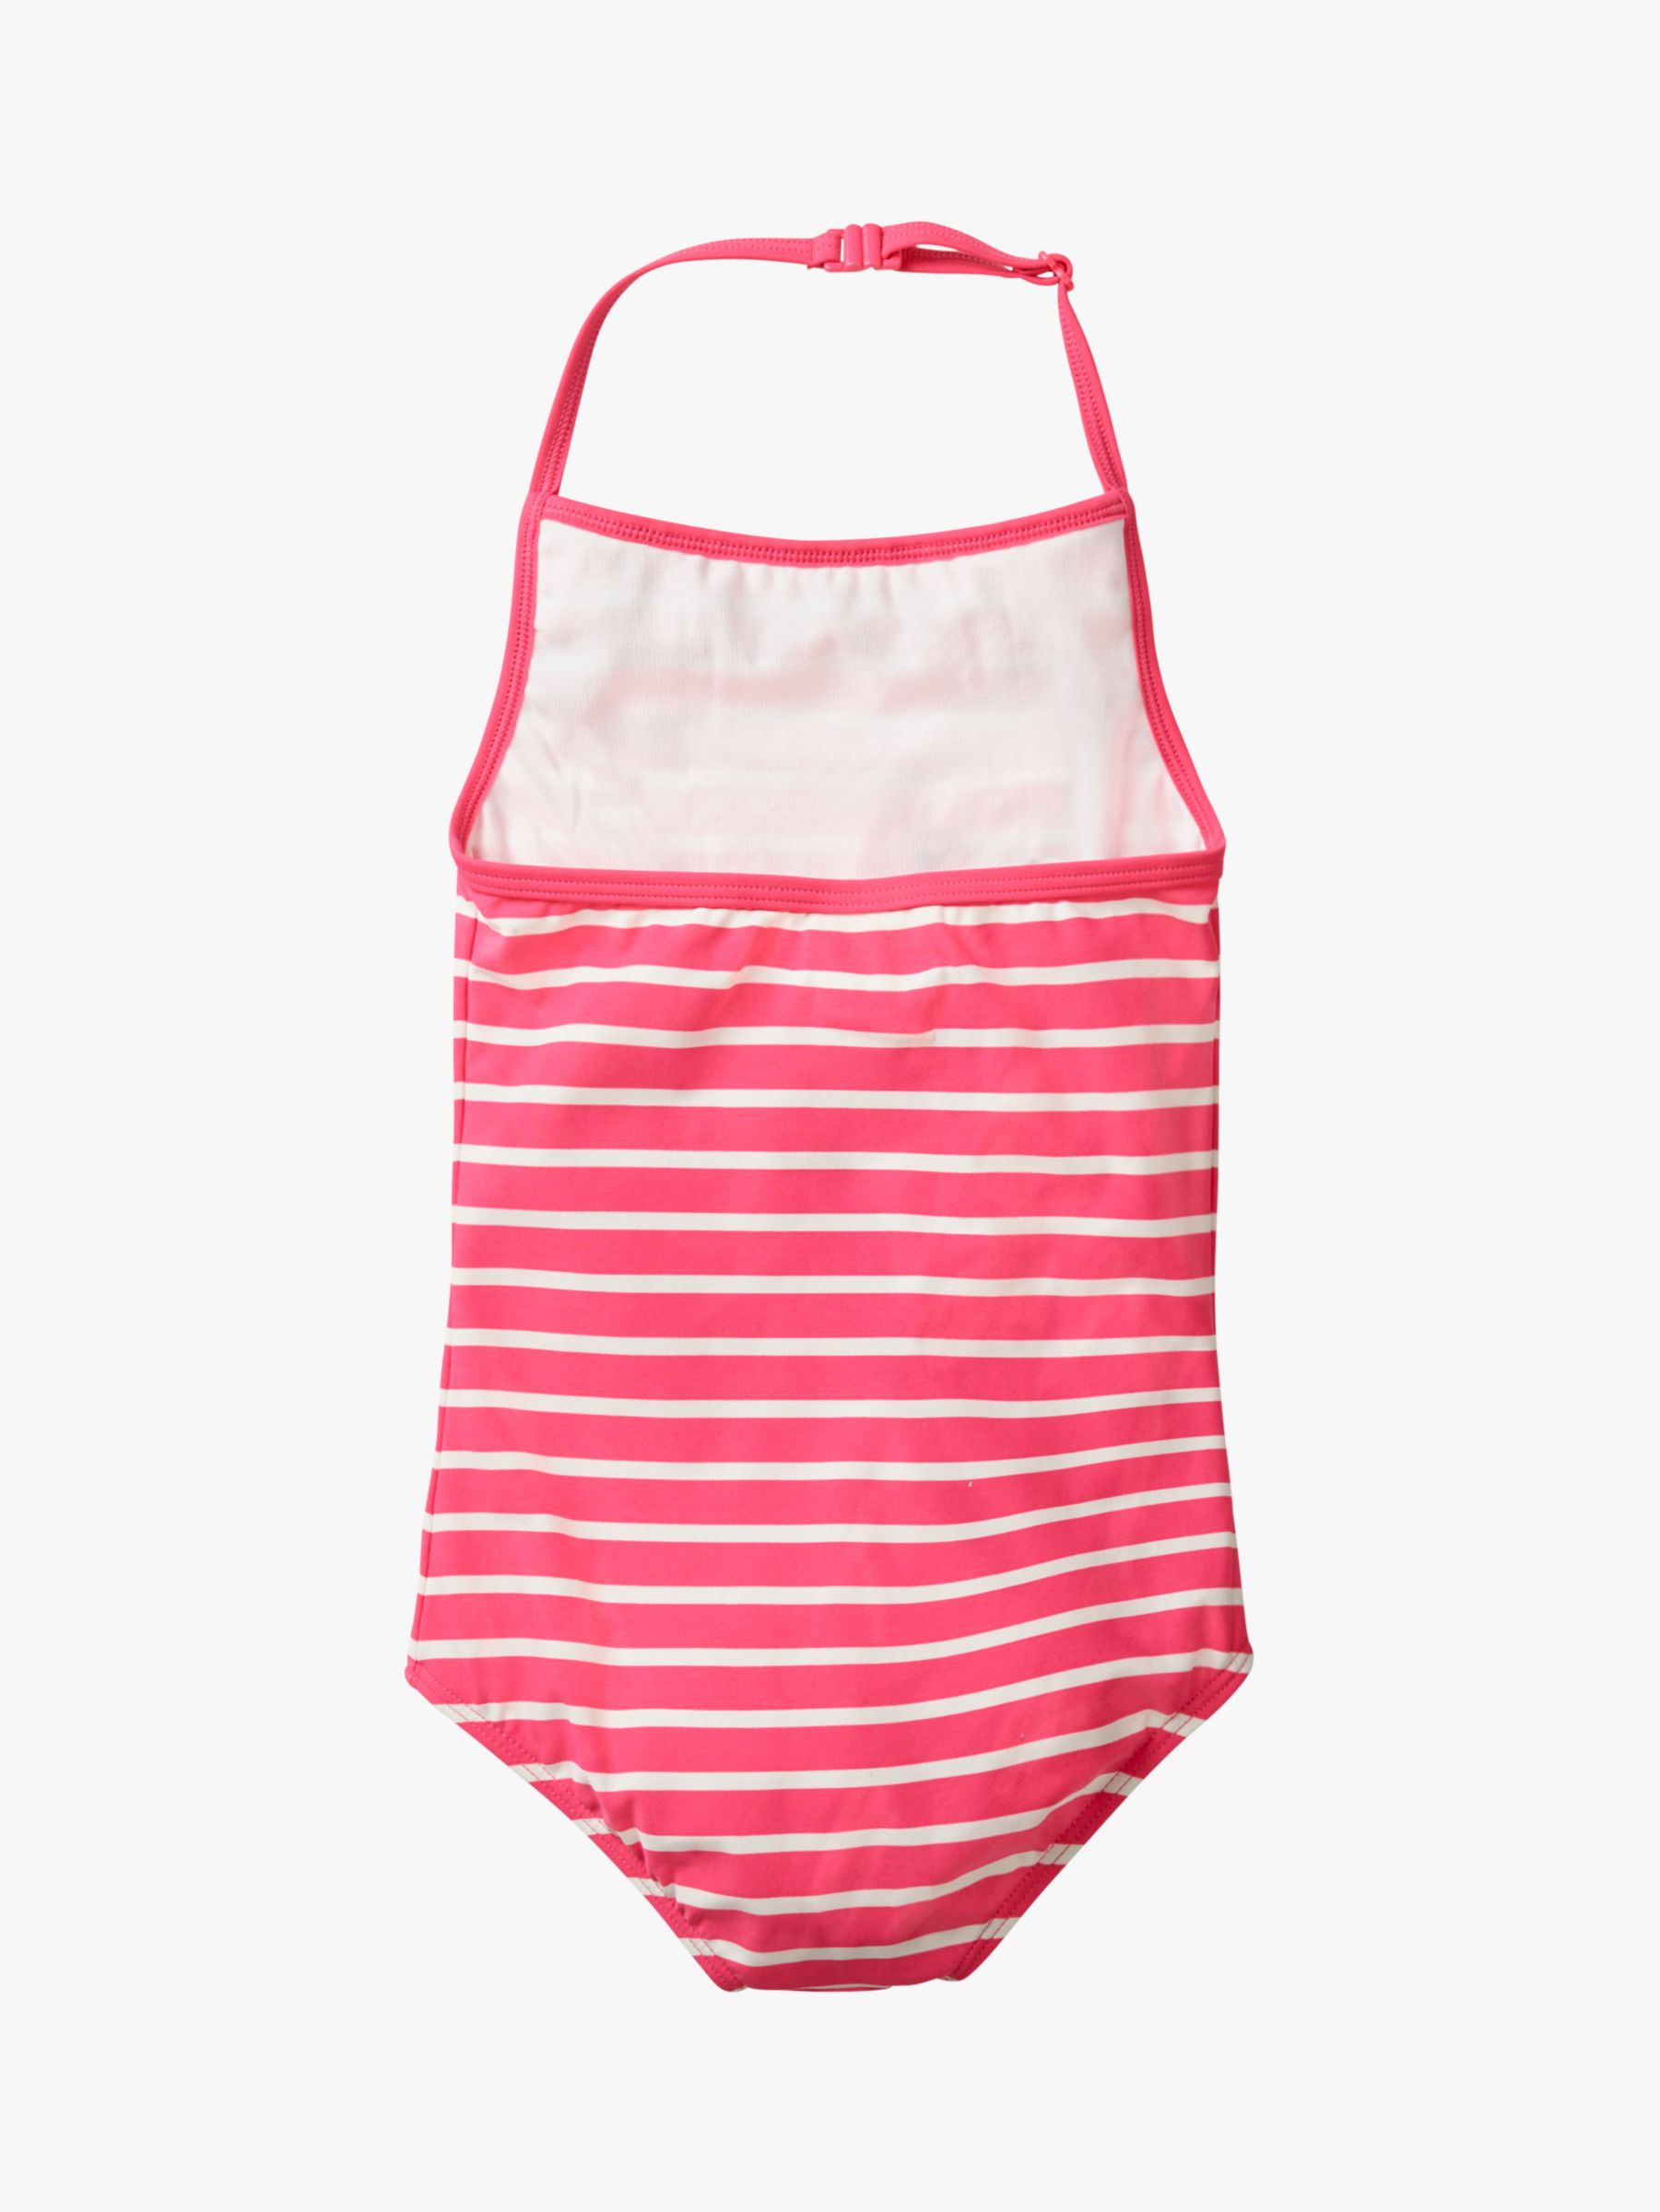 Mini Boden Girls Unicorn Applique Swimsuit Pink At John Lewis And Partners